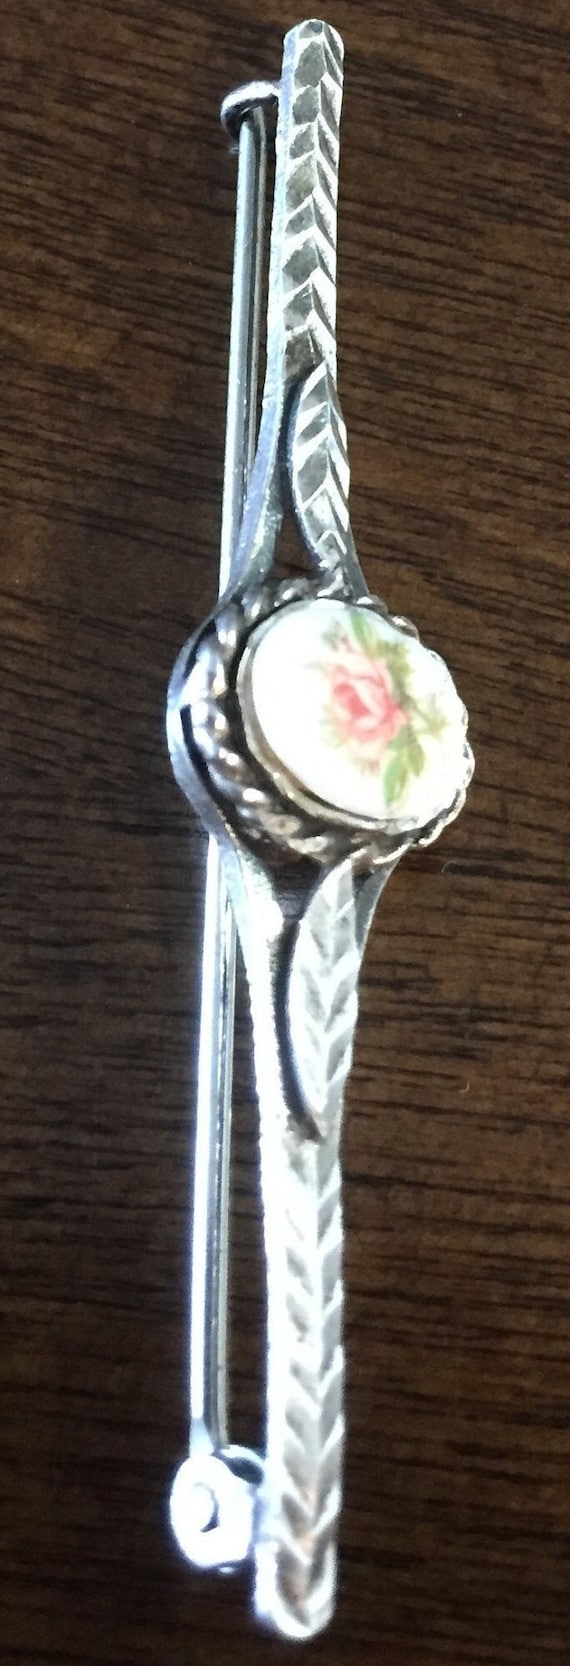 Antique 1900s silver, painted rose pin.  England.